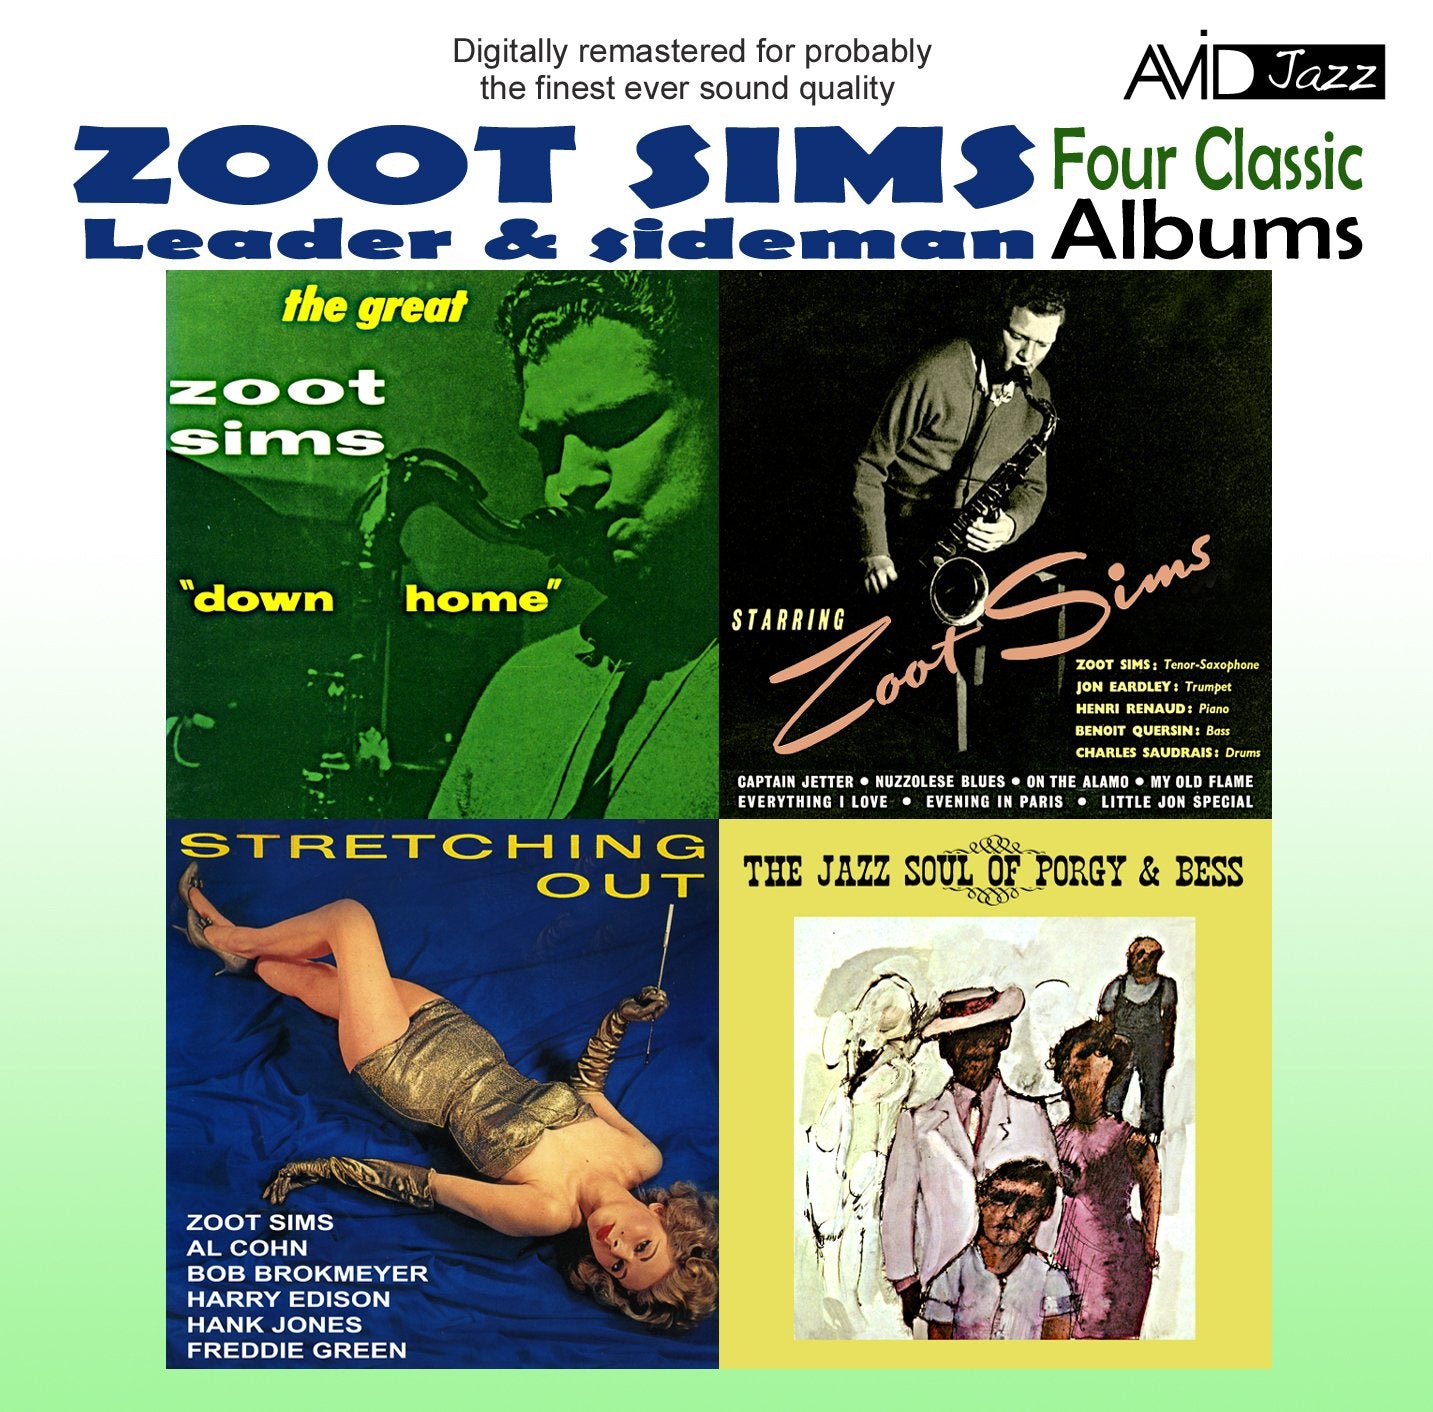 ZOOT SIMS: FOUR CLASSIC ALBUMS (STRETCHING OUT / STARRING ZOOT SIMS / DOWN HOME / THE JAZZ SOUL OF PORGY AND BESS) (2CD)